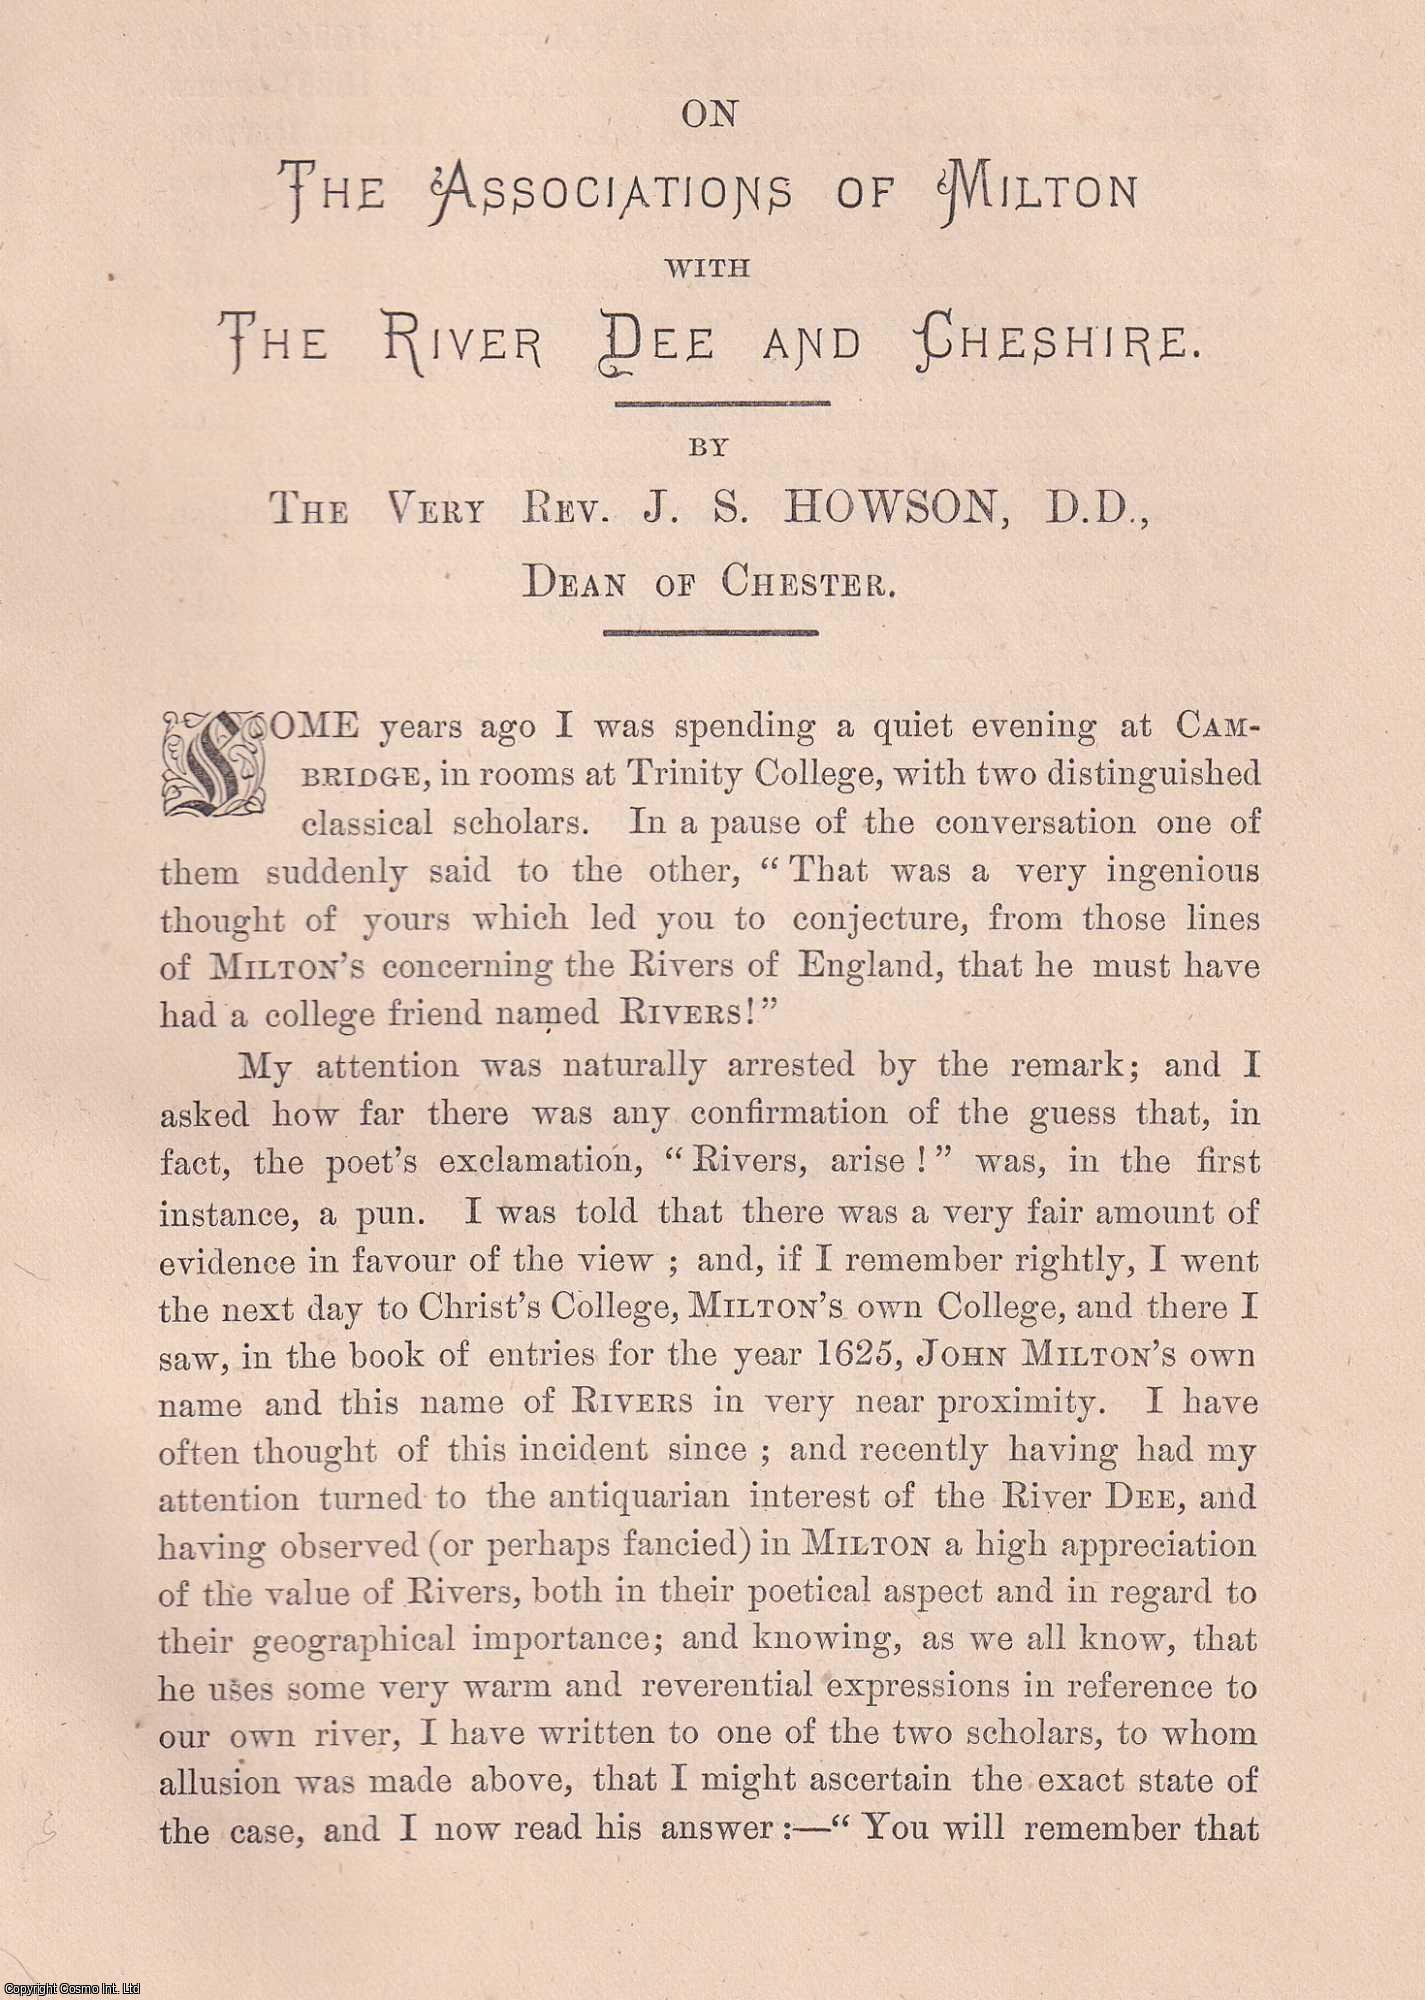 J.S. Howson, D.D., Dean of Chester - On the Associations of Milton with the River Dee and Cheshire. An original article from the Journal of the Architectural, Archaeological, and Historic Society of Chester, 1885.